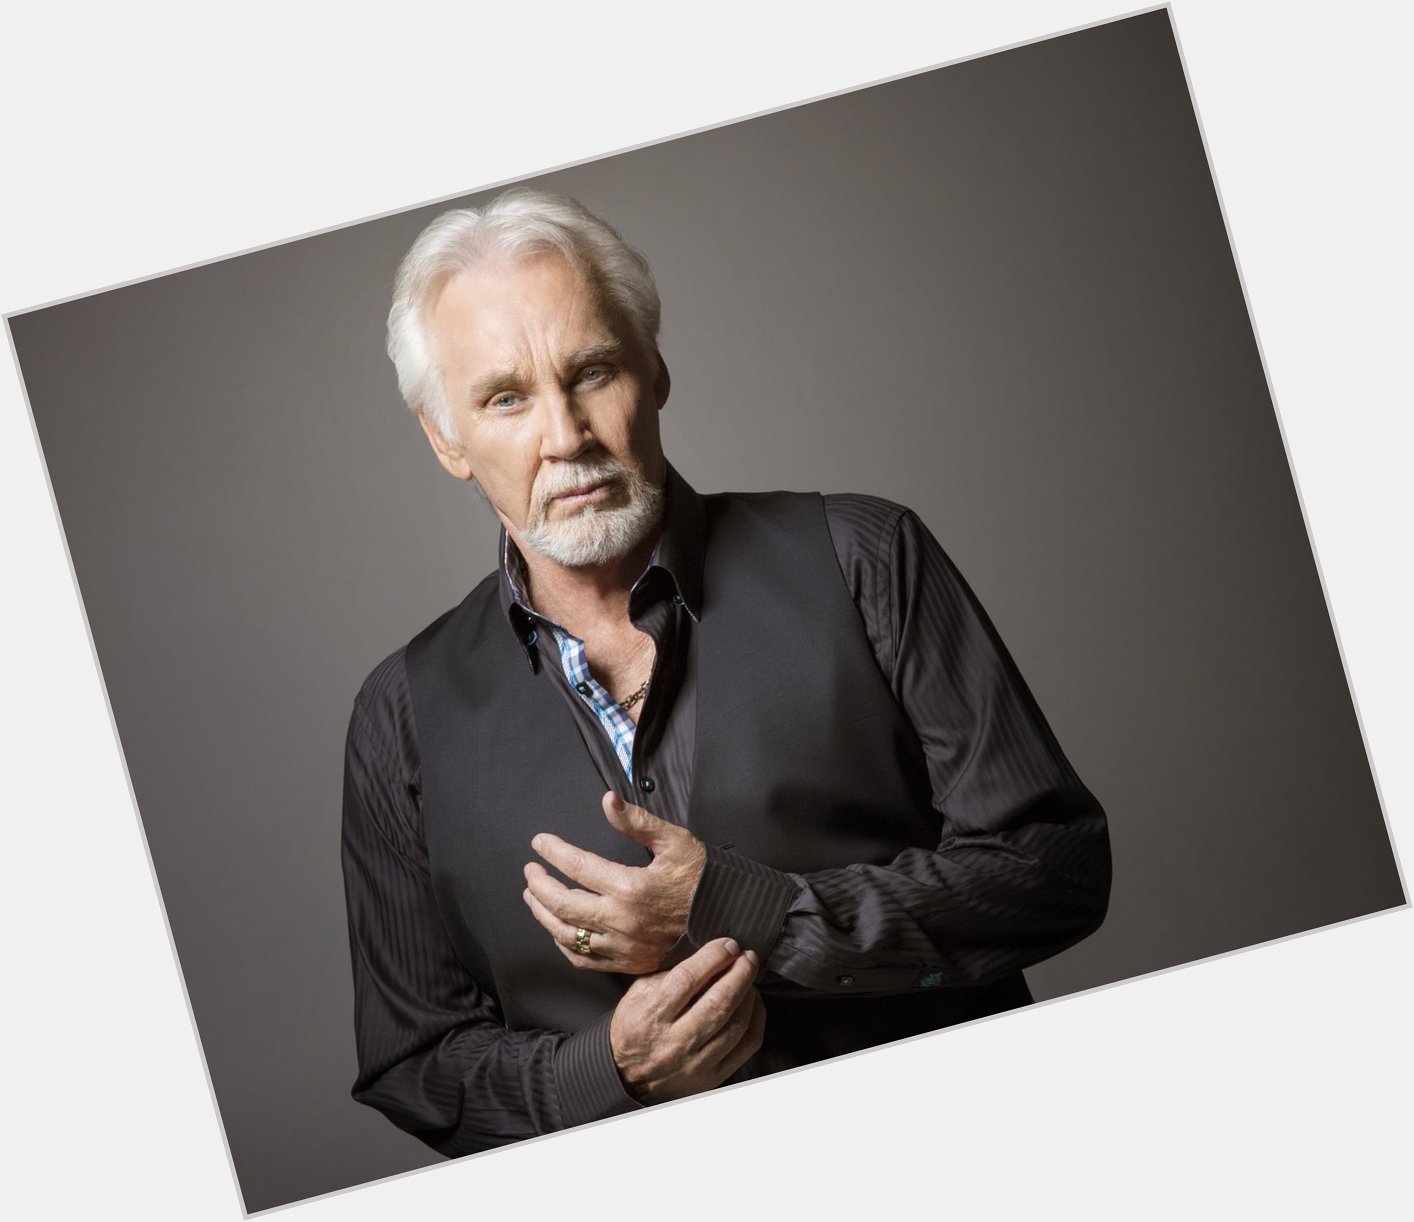 Wishing a very Happy Birthday to Kenny Rogers. He turns 80 today!  